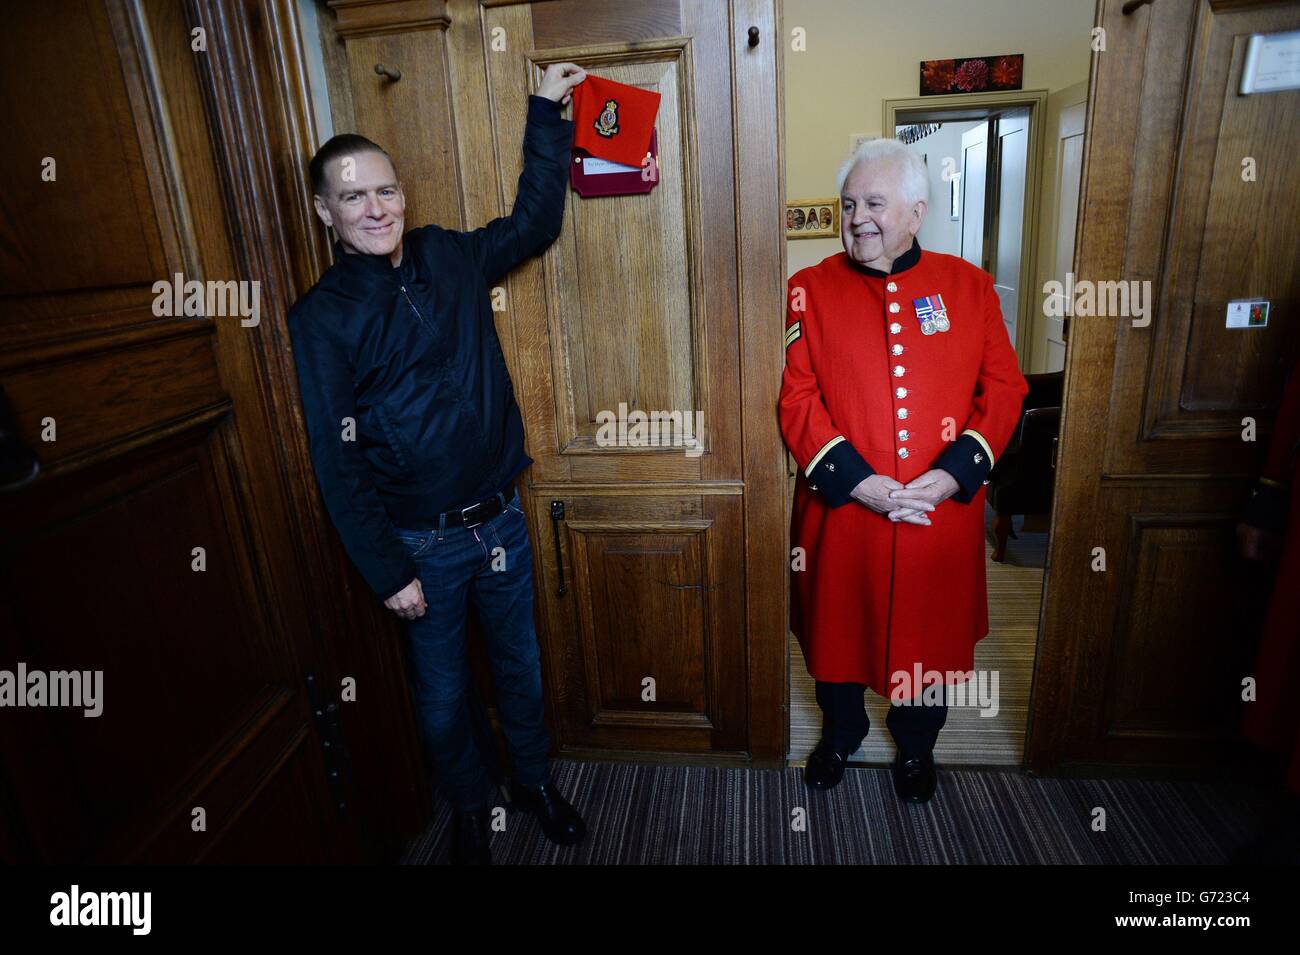 Singer and Photographer Bryan Adams meets Chelsea Pensioner 81 year old Tom Mullaney at the Royal Chelsea Hospital in London where he named a Berth which the Bryan Adams Foundation has supported the hospital's extensive refurbishment. Stock Photo